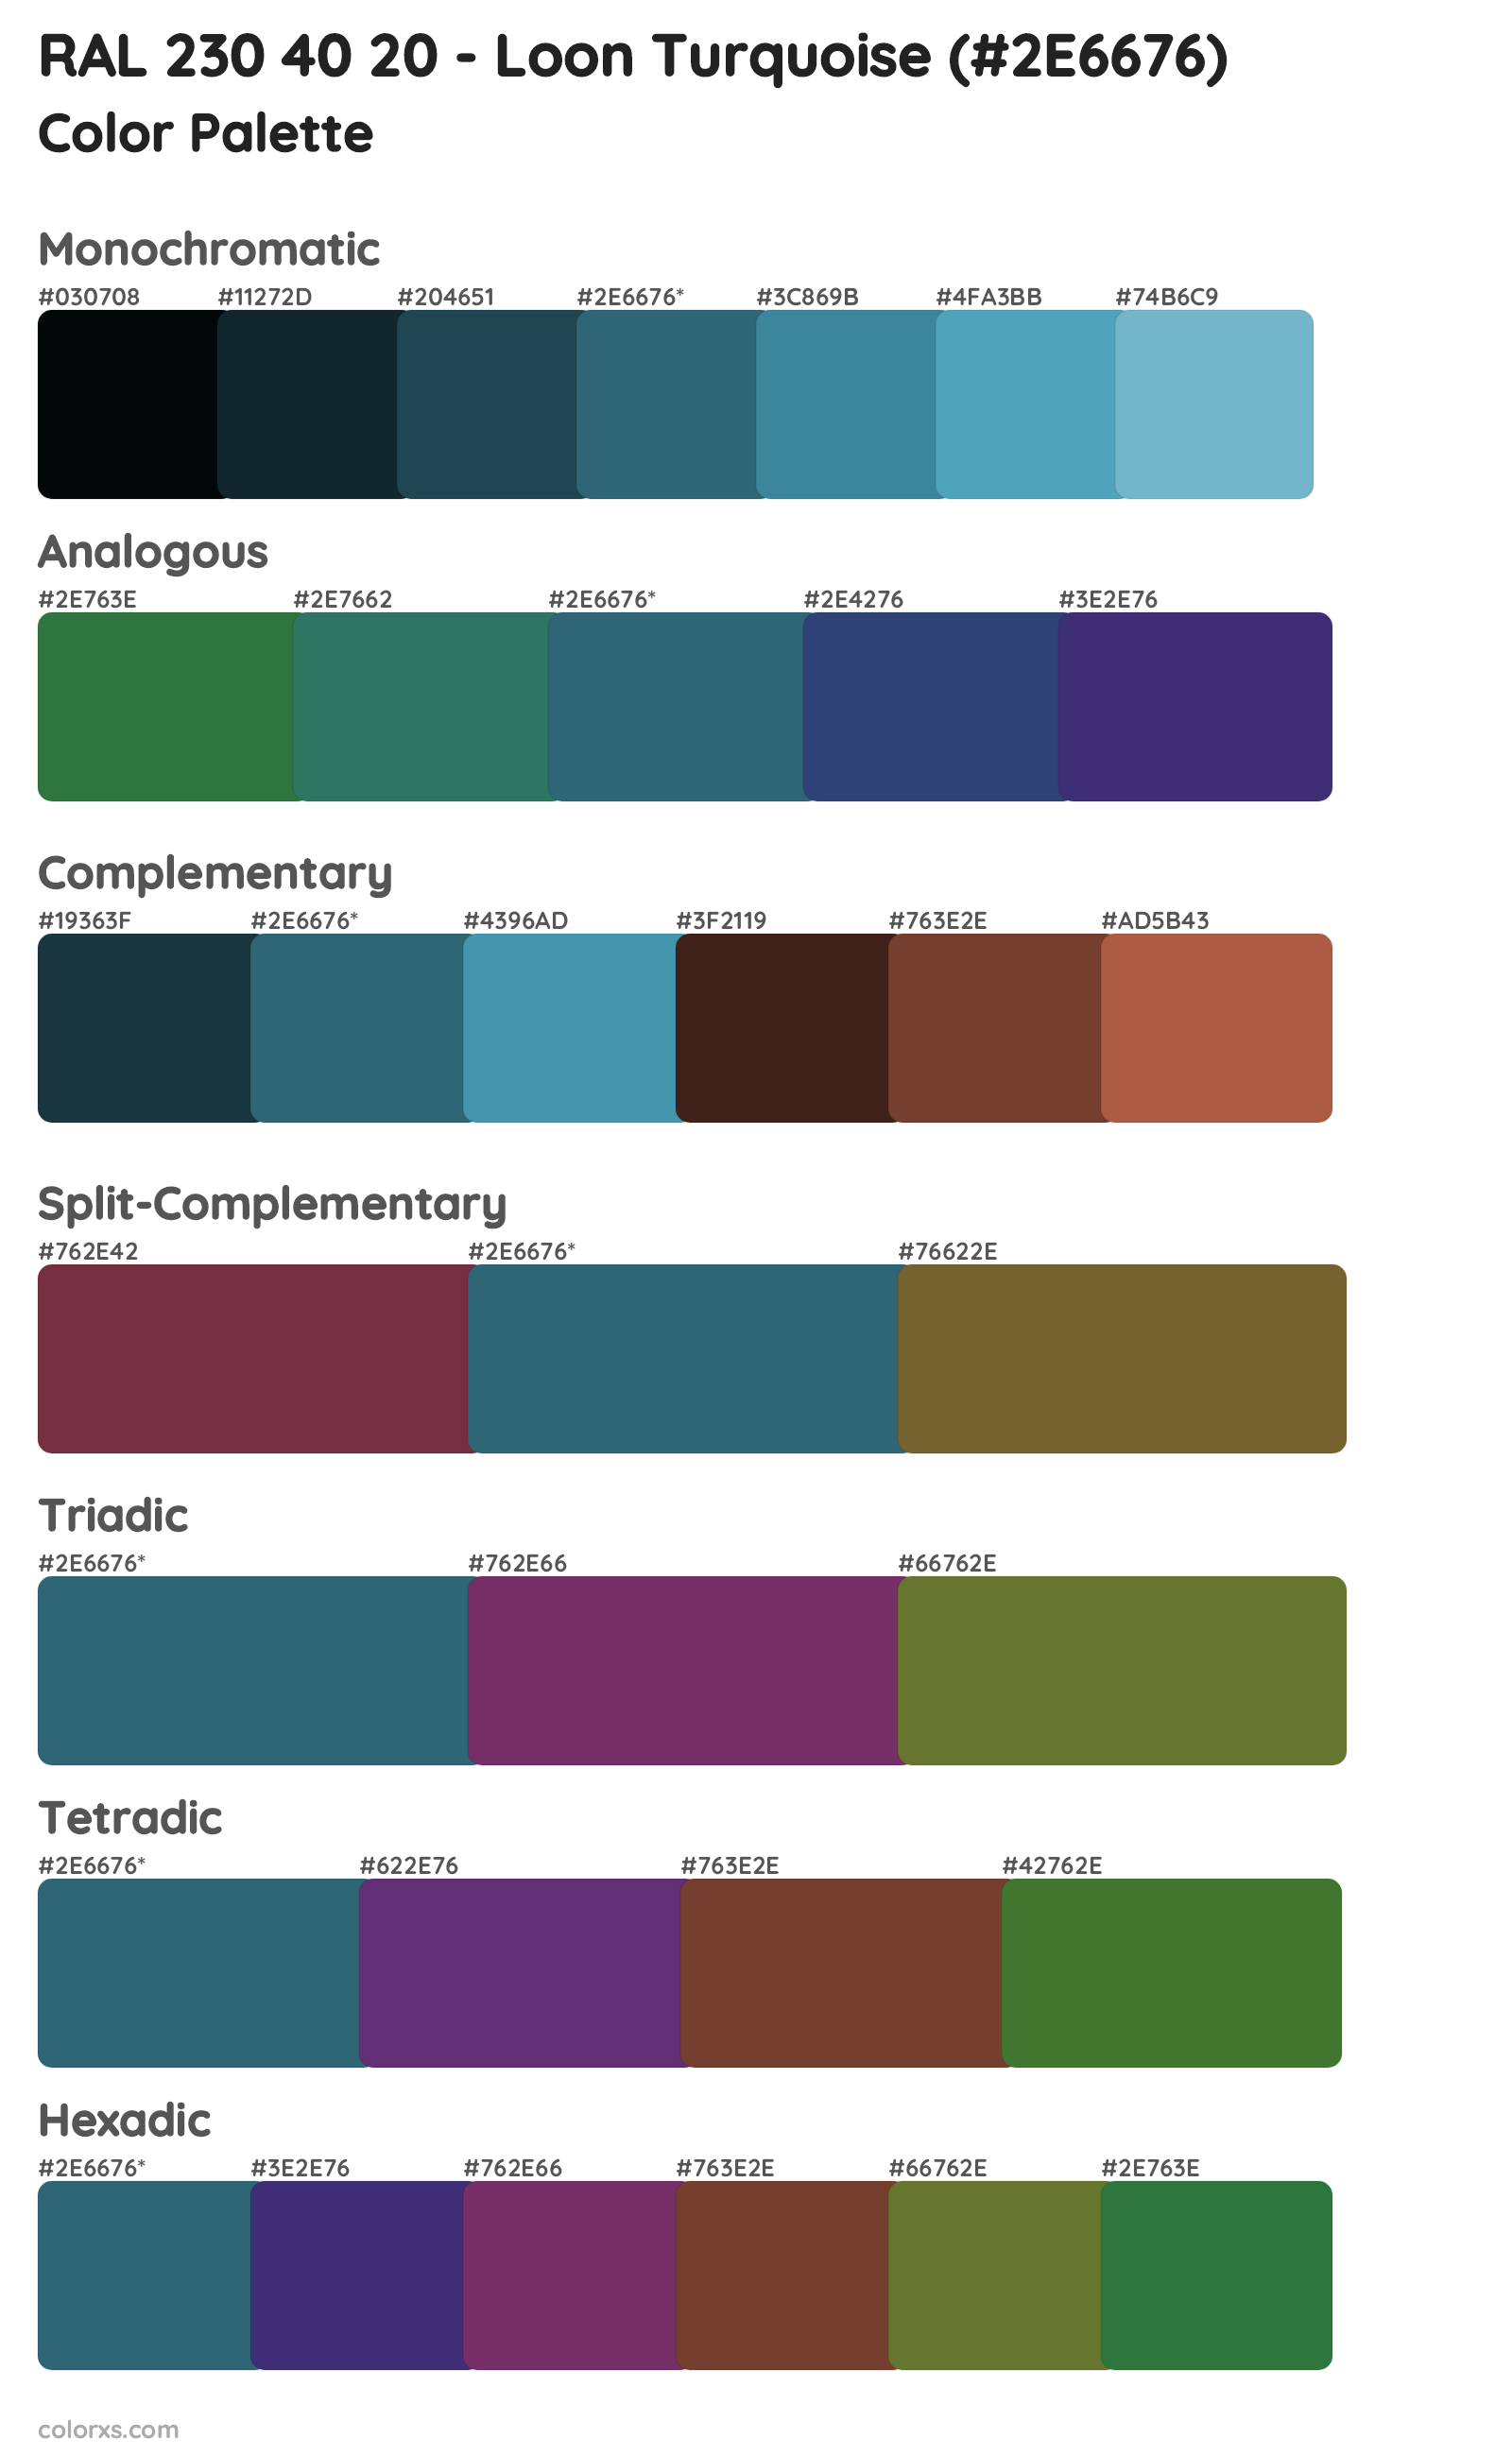 RAL 230 40 20 - Loon Turquoise Color Scheme Palettes